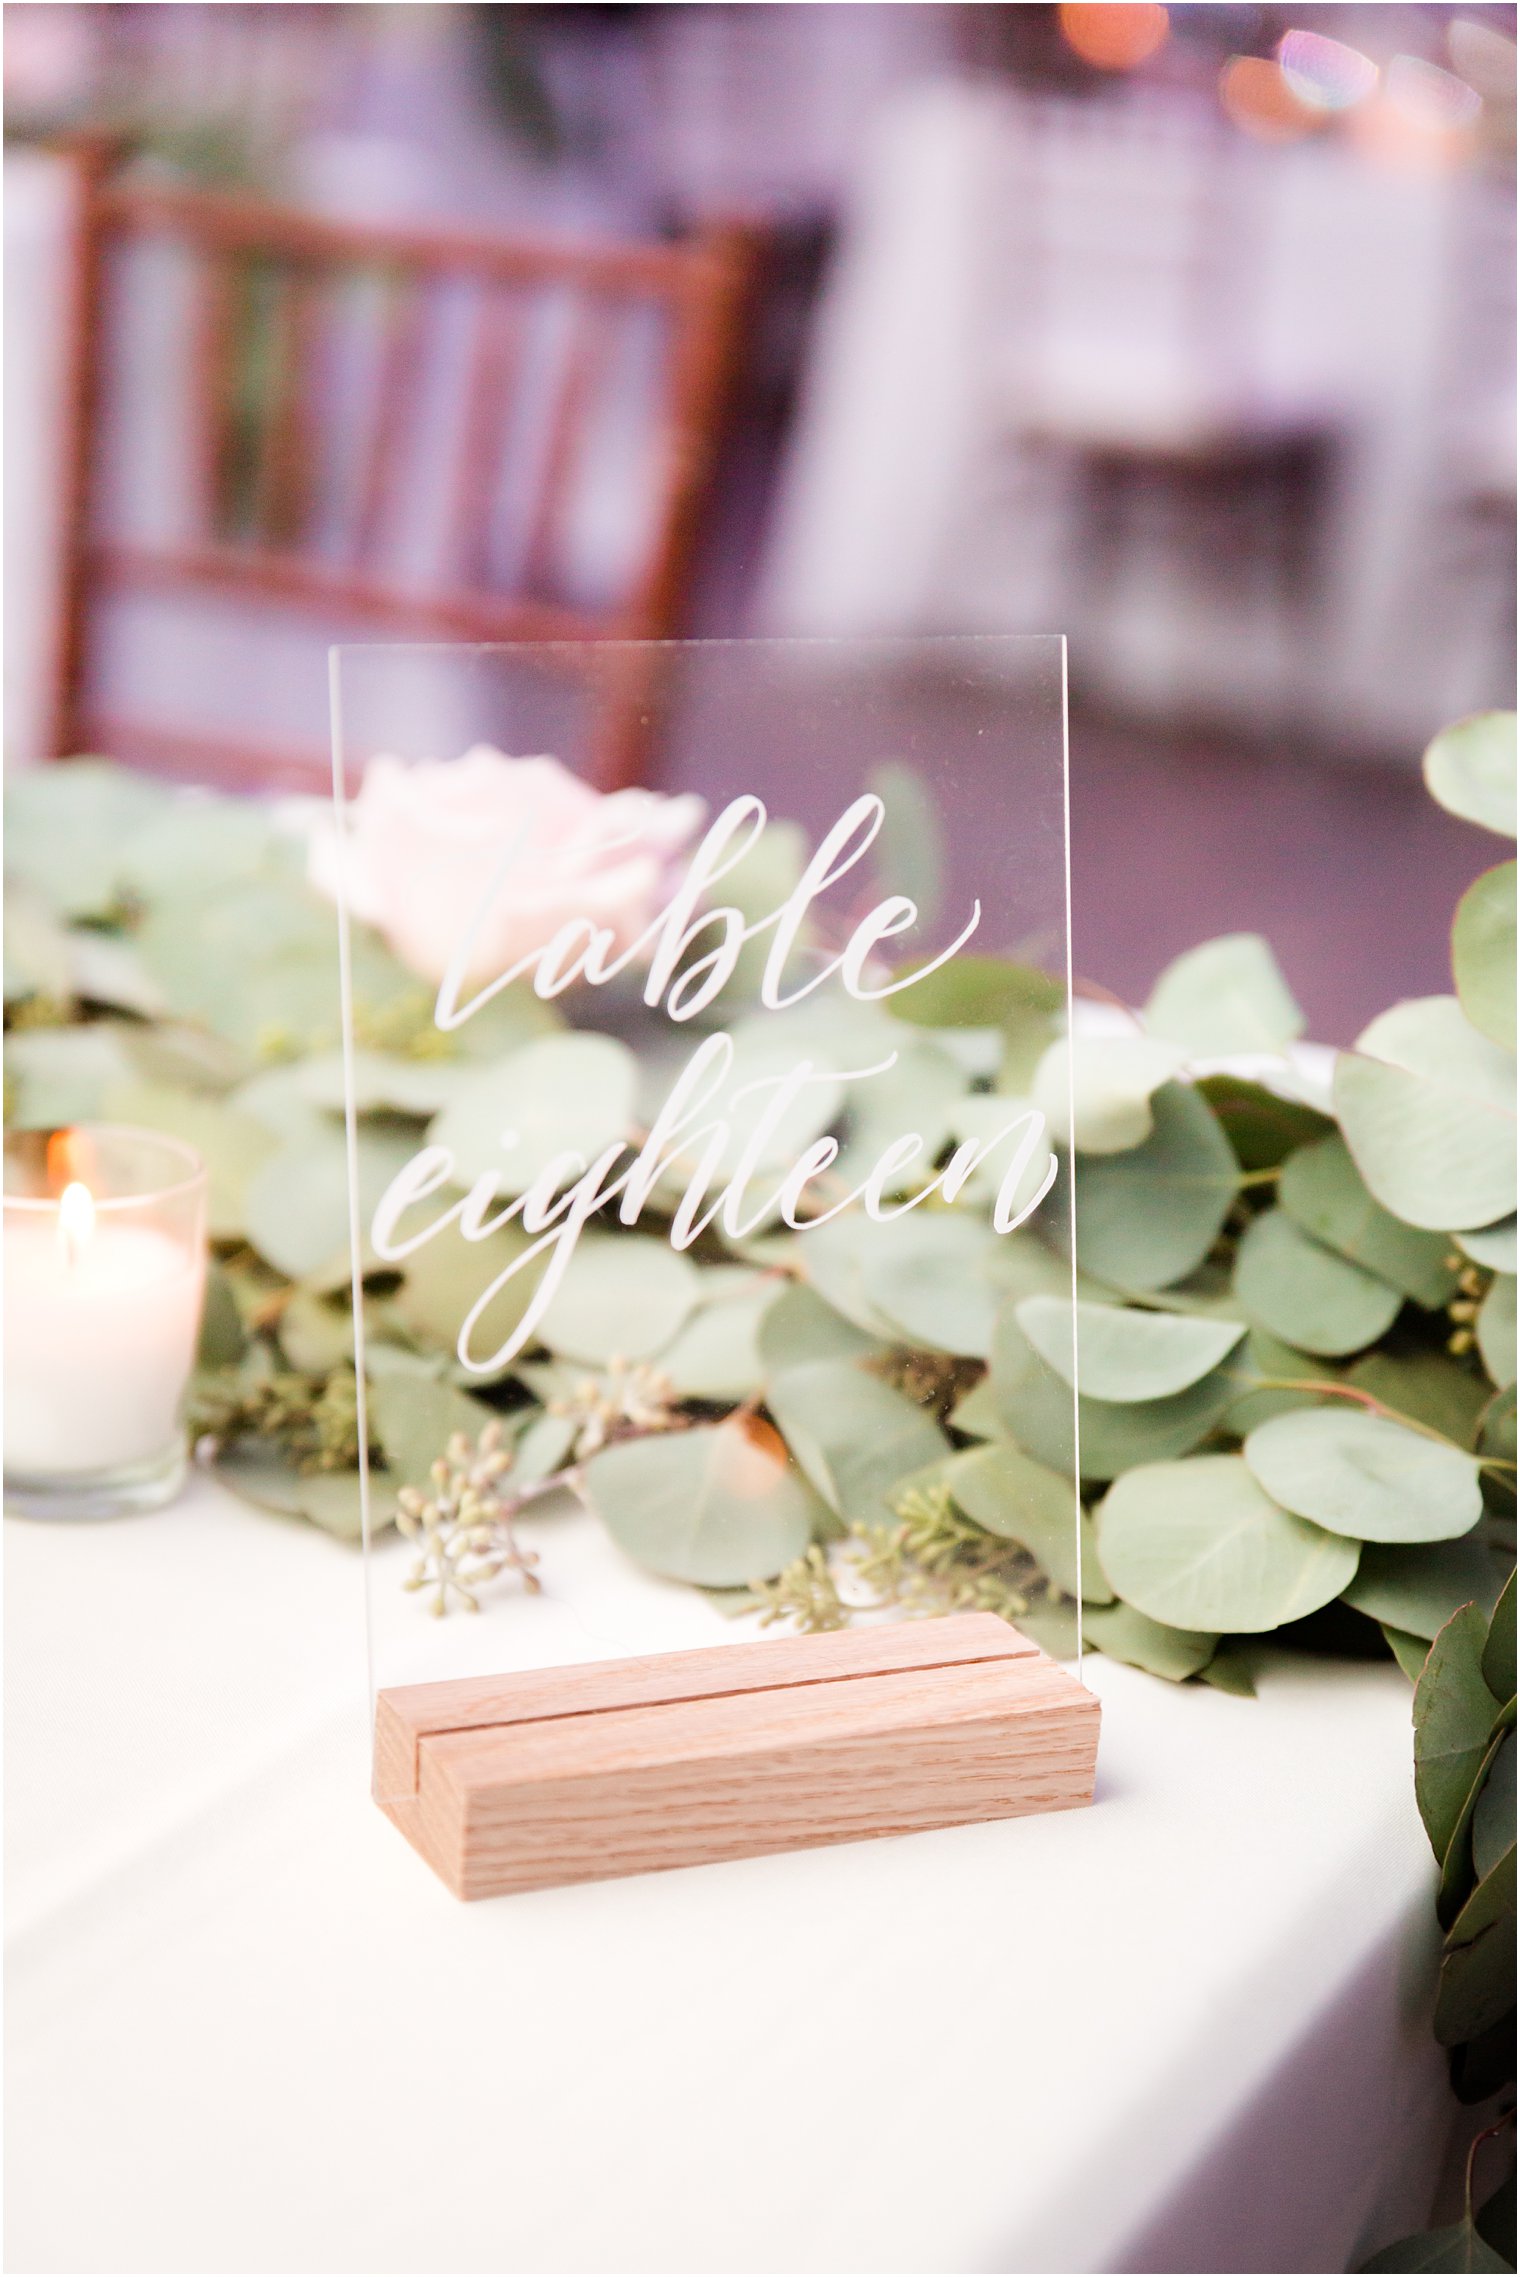 Acrylic table number with calligraphy 